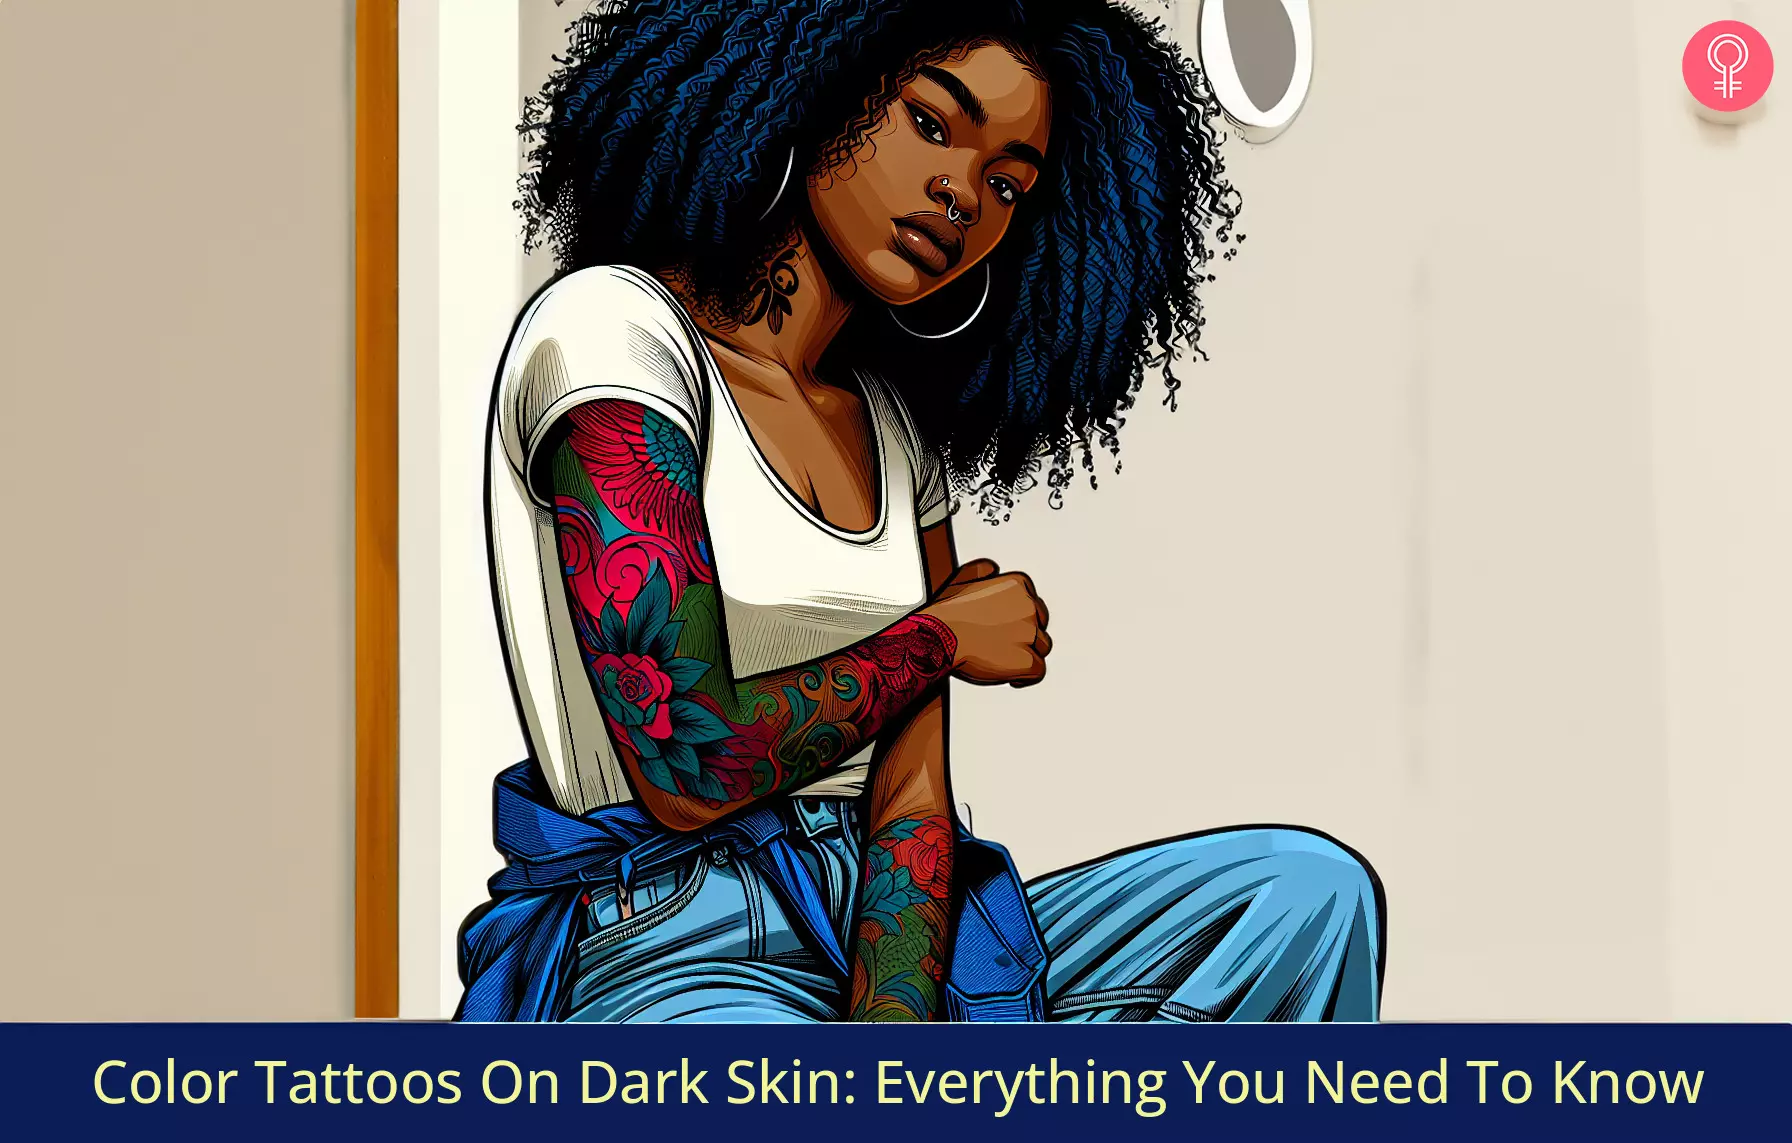 Color Tattoos On Dark Skin: Everything You Need To Know